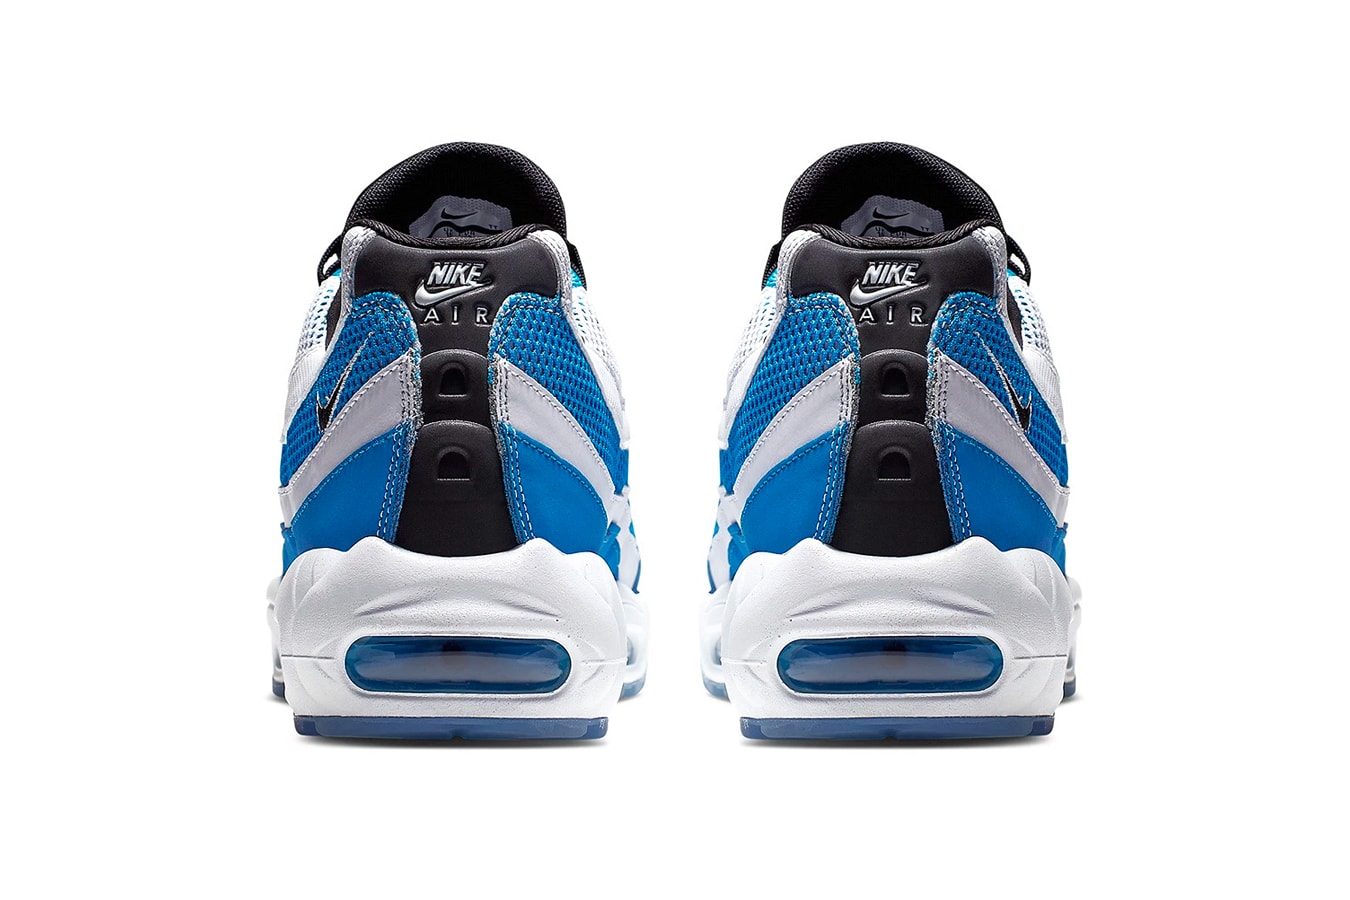 Royal Blue Nike Air Max 95 by Sergio Lozano sneakers shoes sporty 